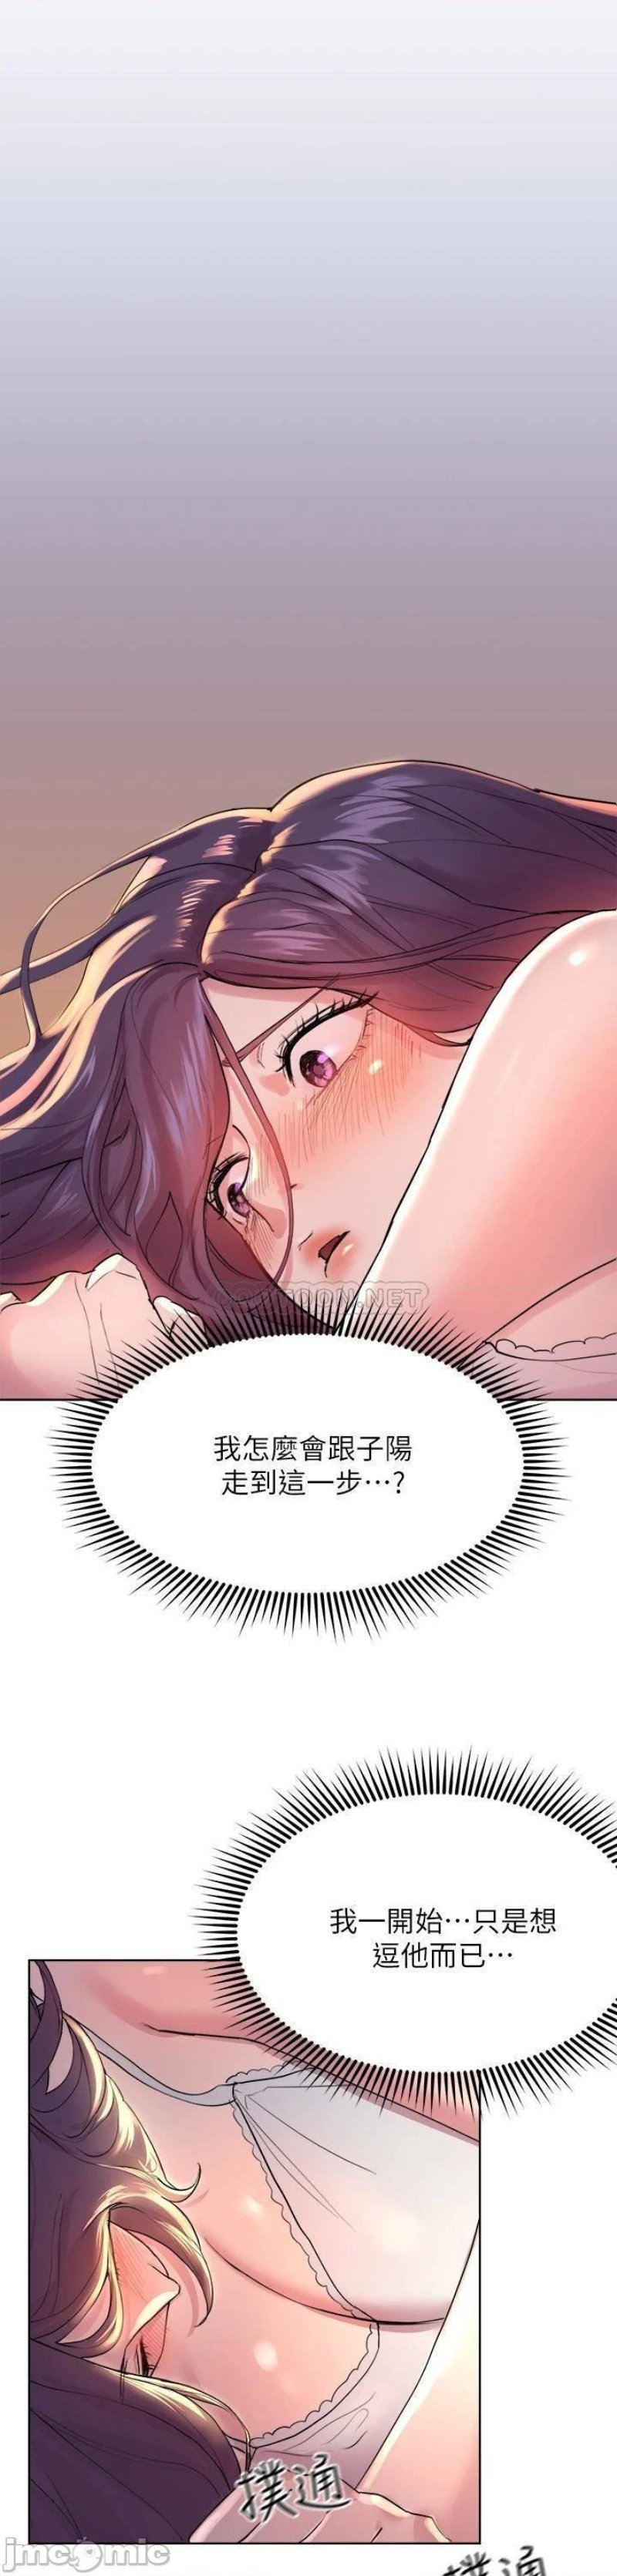 my-sisters-friends-raw-chap-3-31